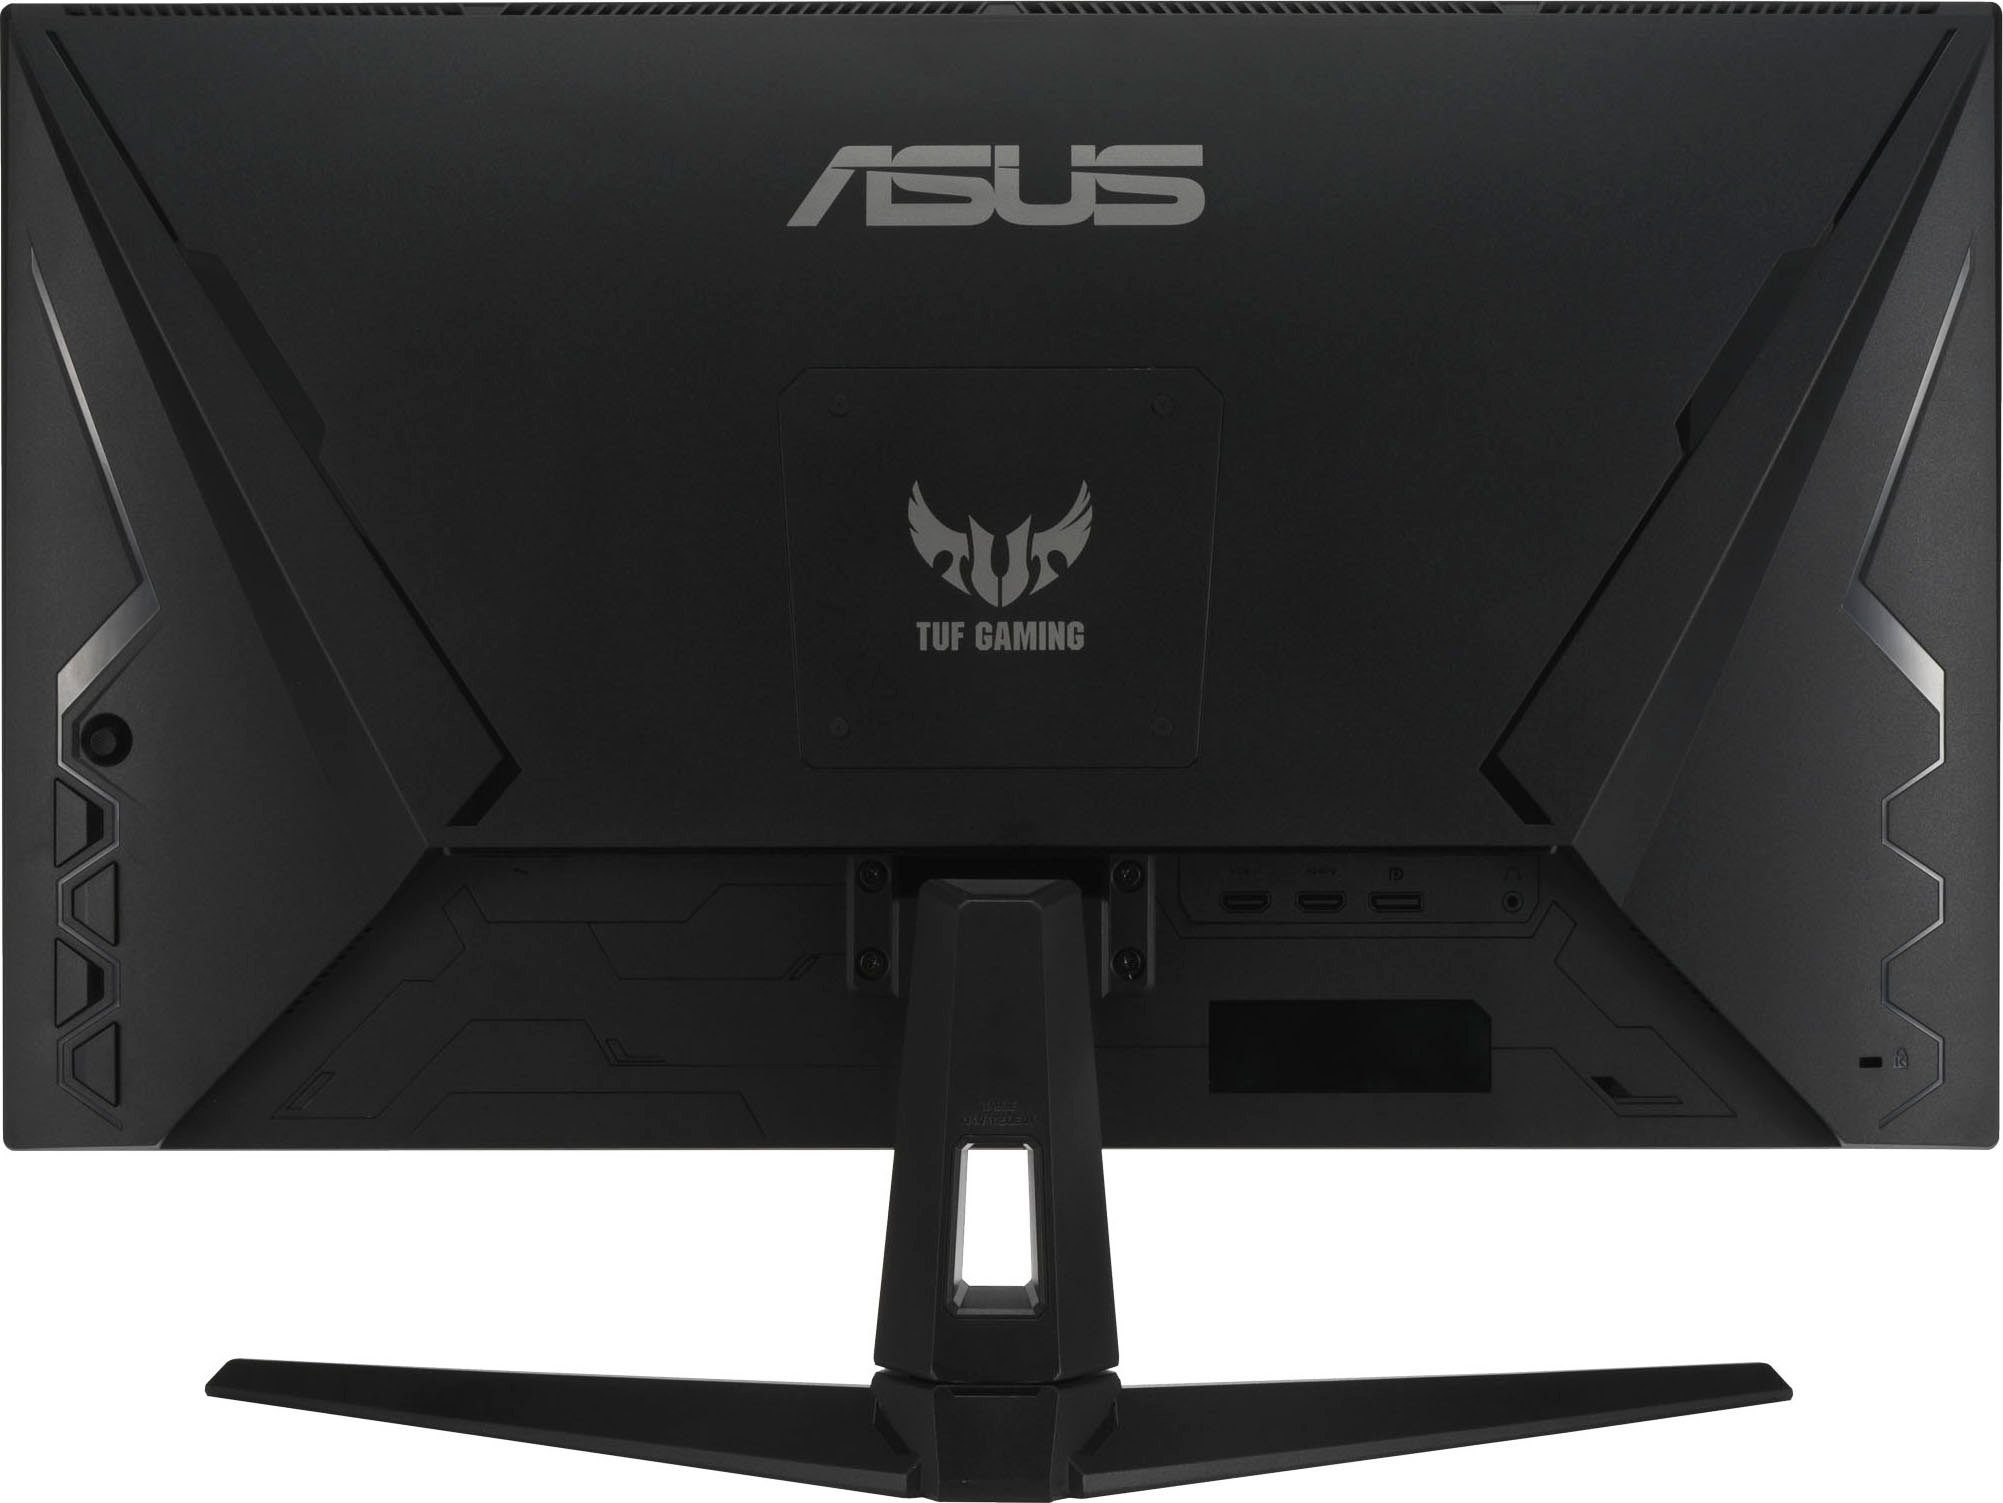 VG289Q1A 5 Asus (71,12 IPS) Hz, 60 LED-Monitor 4K Ultra HD, px, Reaktionszeit, ", 3840 cm/28 2160 x ms